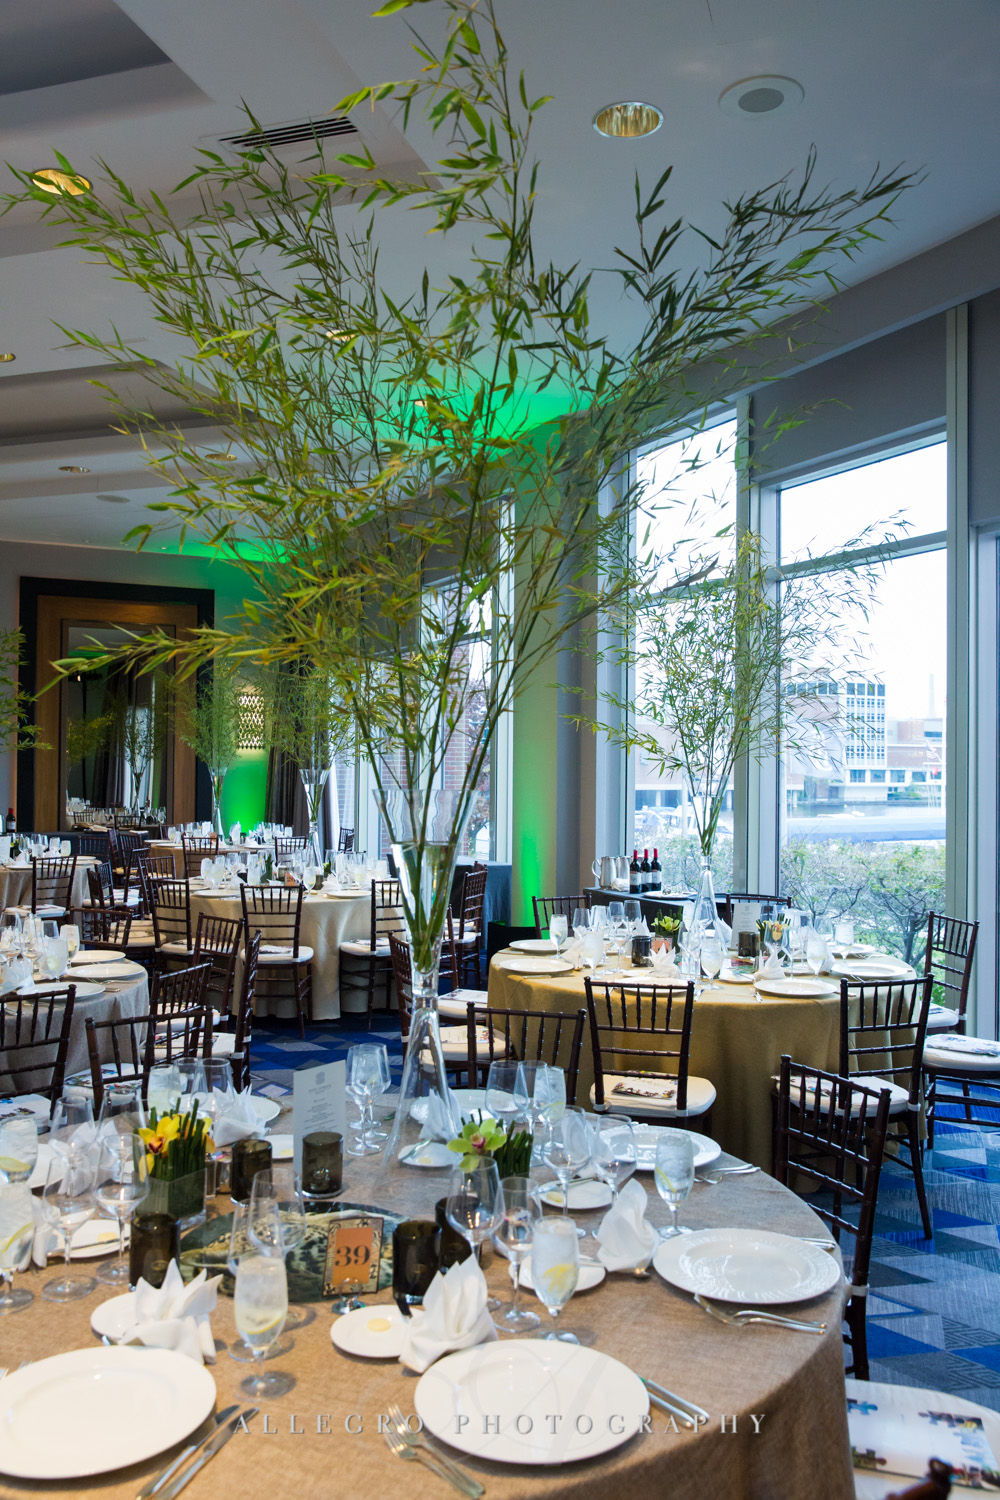 ae events design - photographed by allegro photography